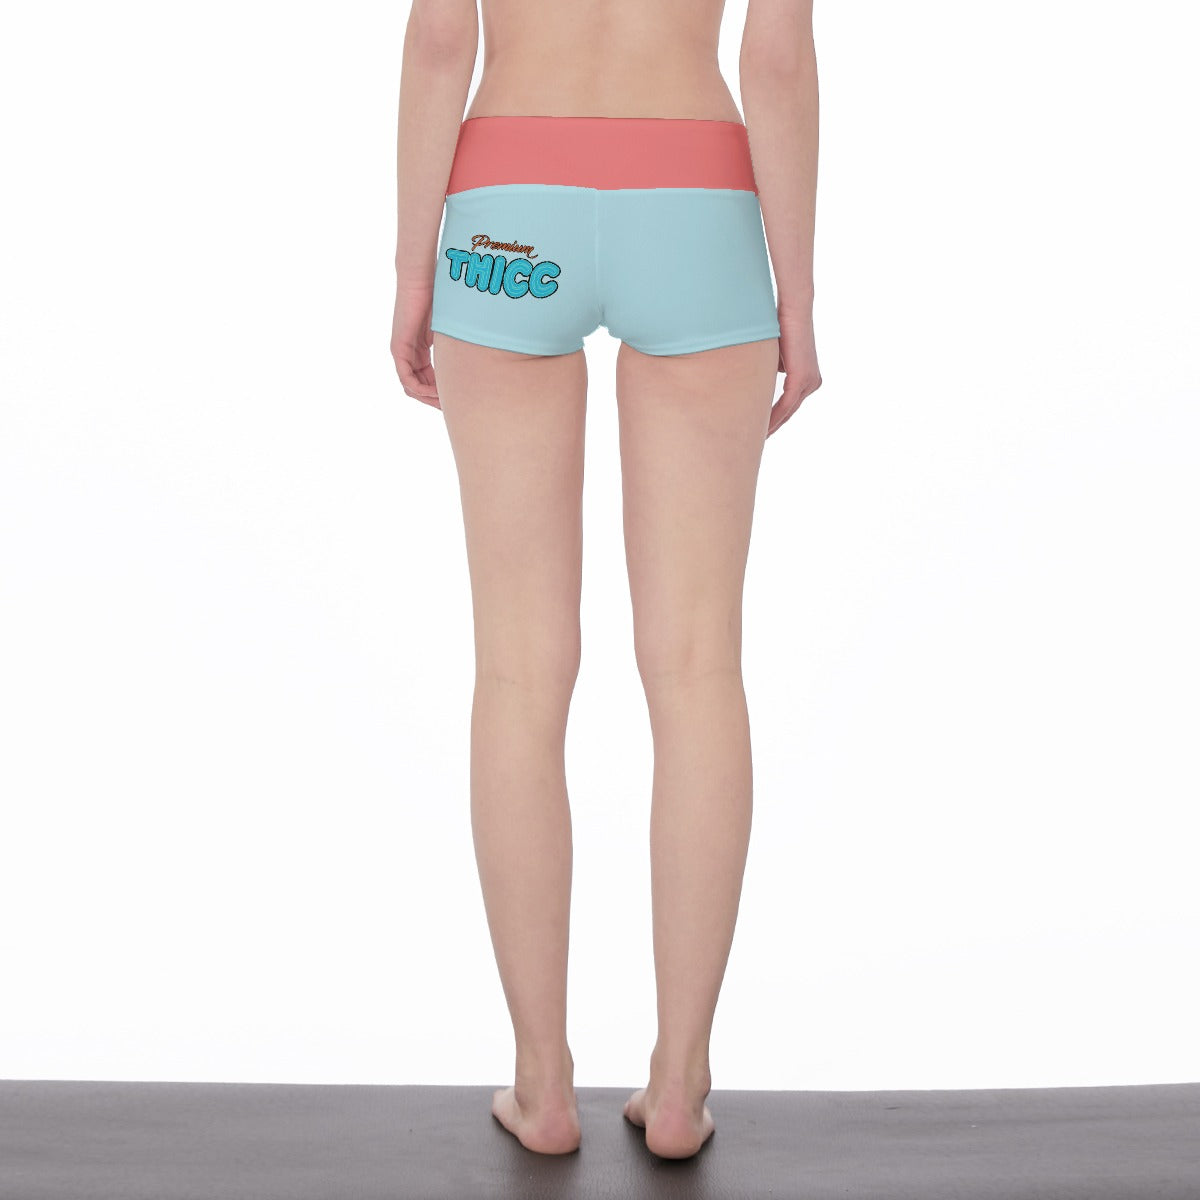 Coral and SKy Premium Thicc Yoga Shorts